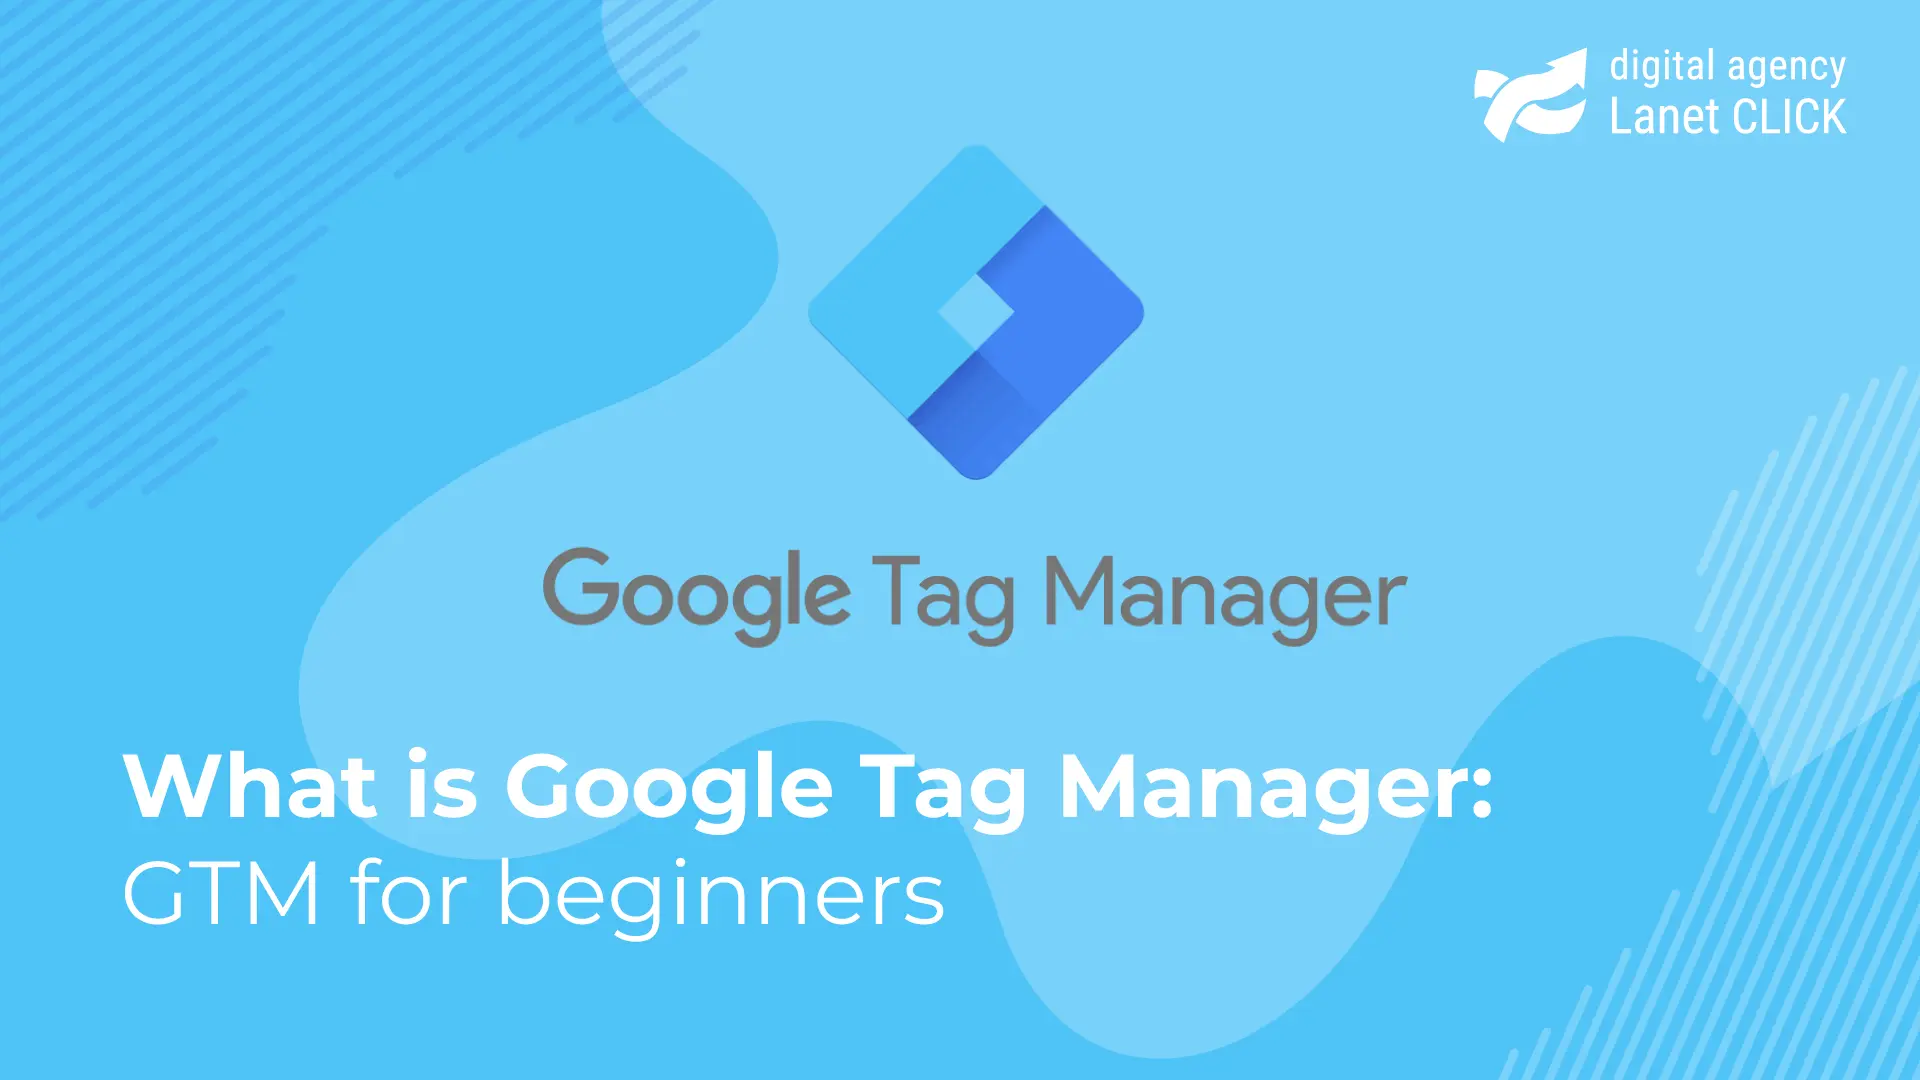 What is Google Tag Manager: GTM for beginners